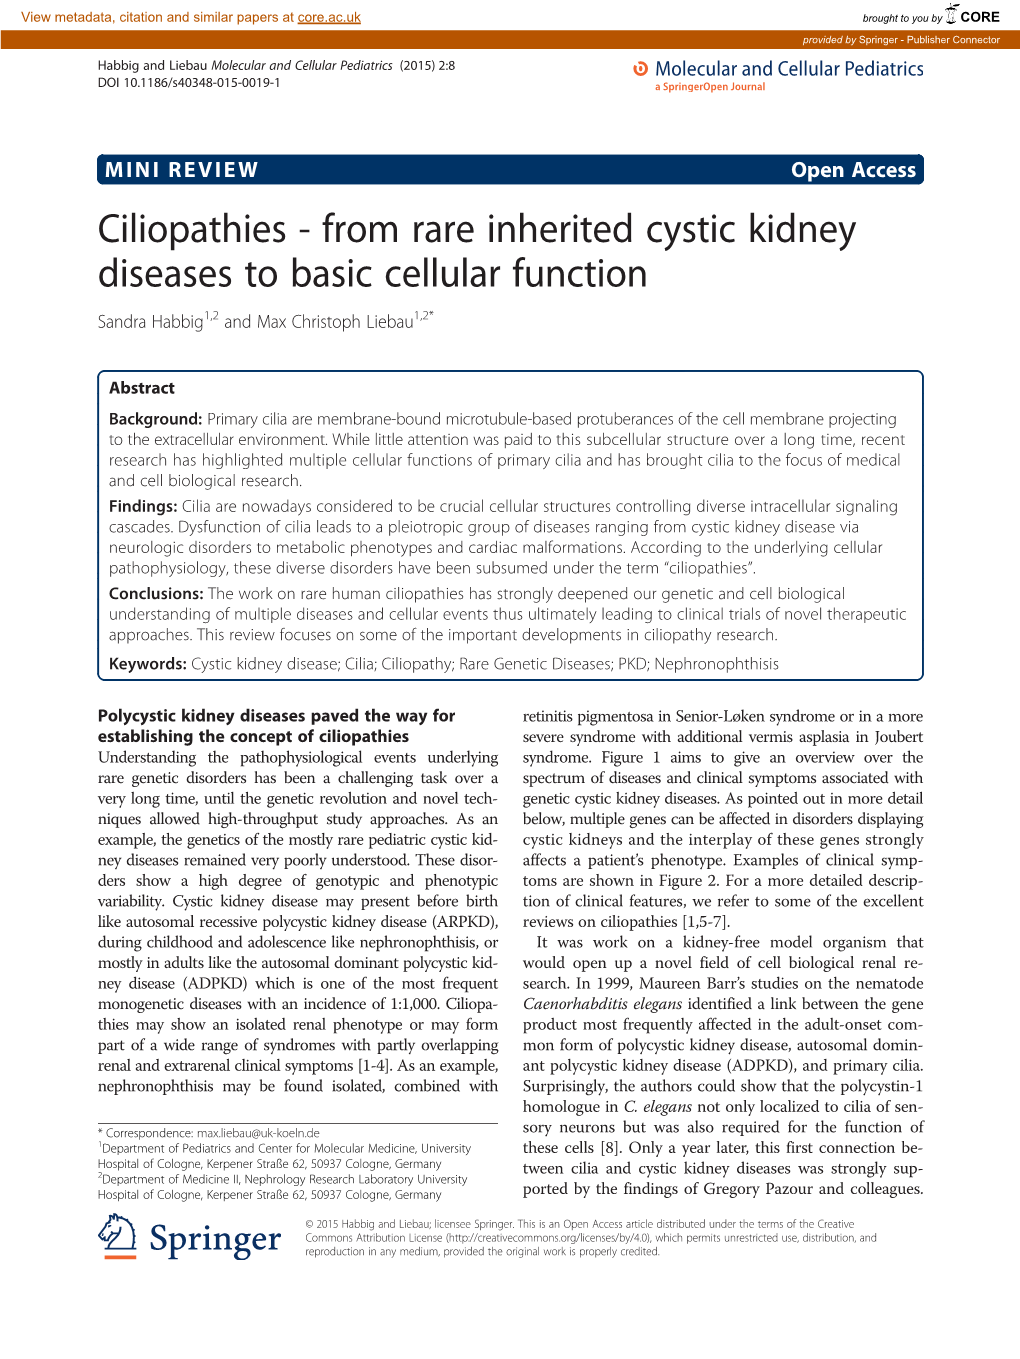 Ciliopathies - from Rare Inherited Cystic Kidney Diseases to Basic Cellular Function Sandra Habbig1,2 and Max Christoph Liebau1,2*